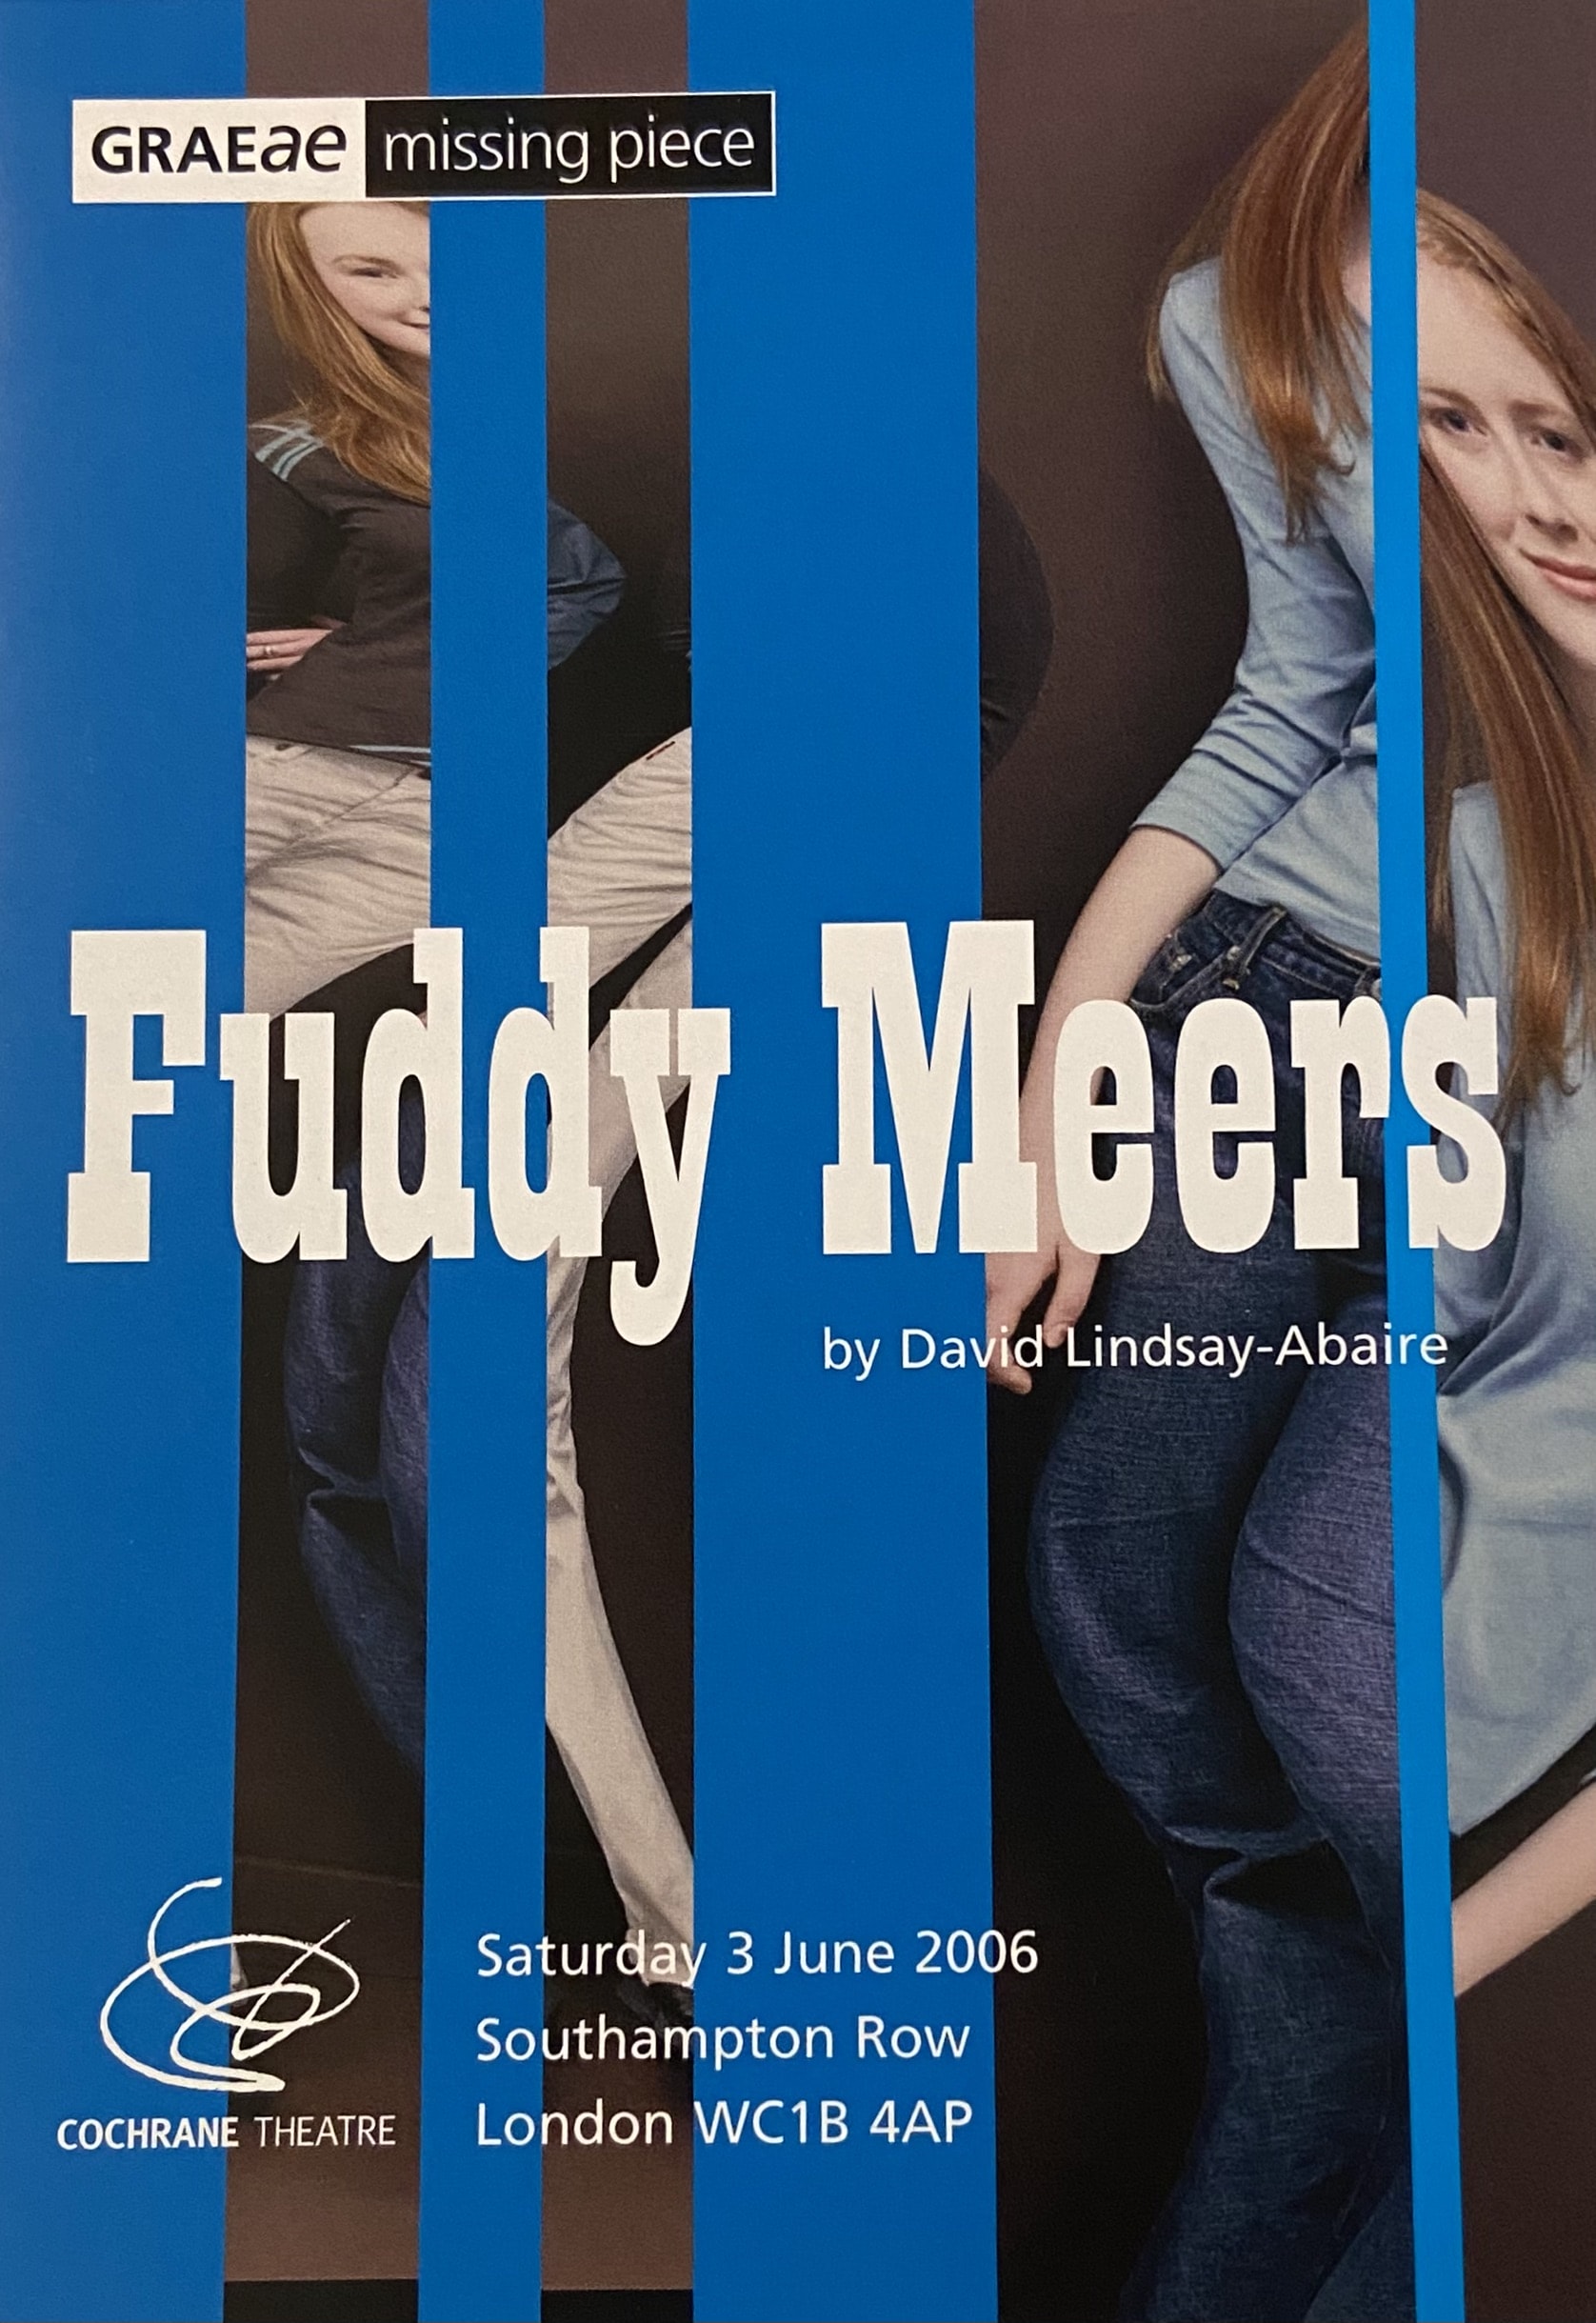 Poster for Fuddy Meers. A regular picture of two women is distorted and broken up by thick blue lines.